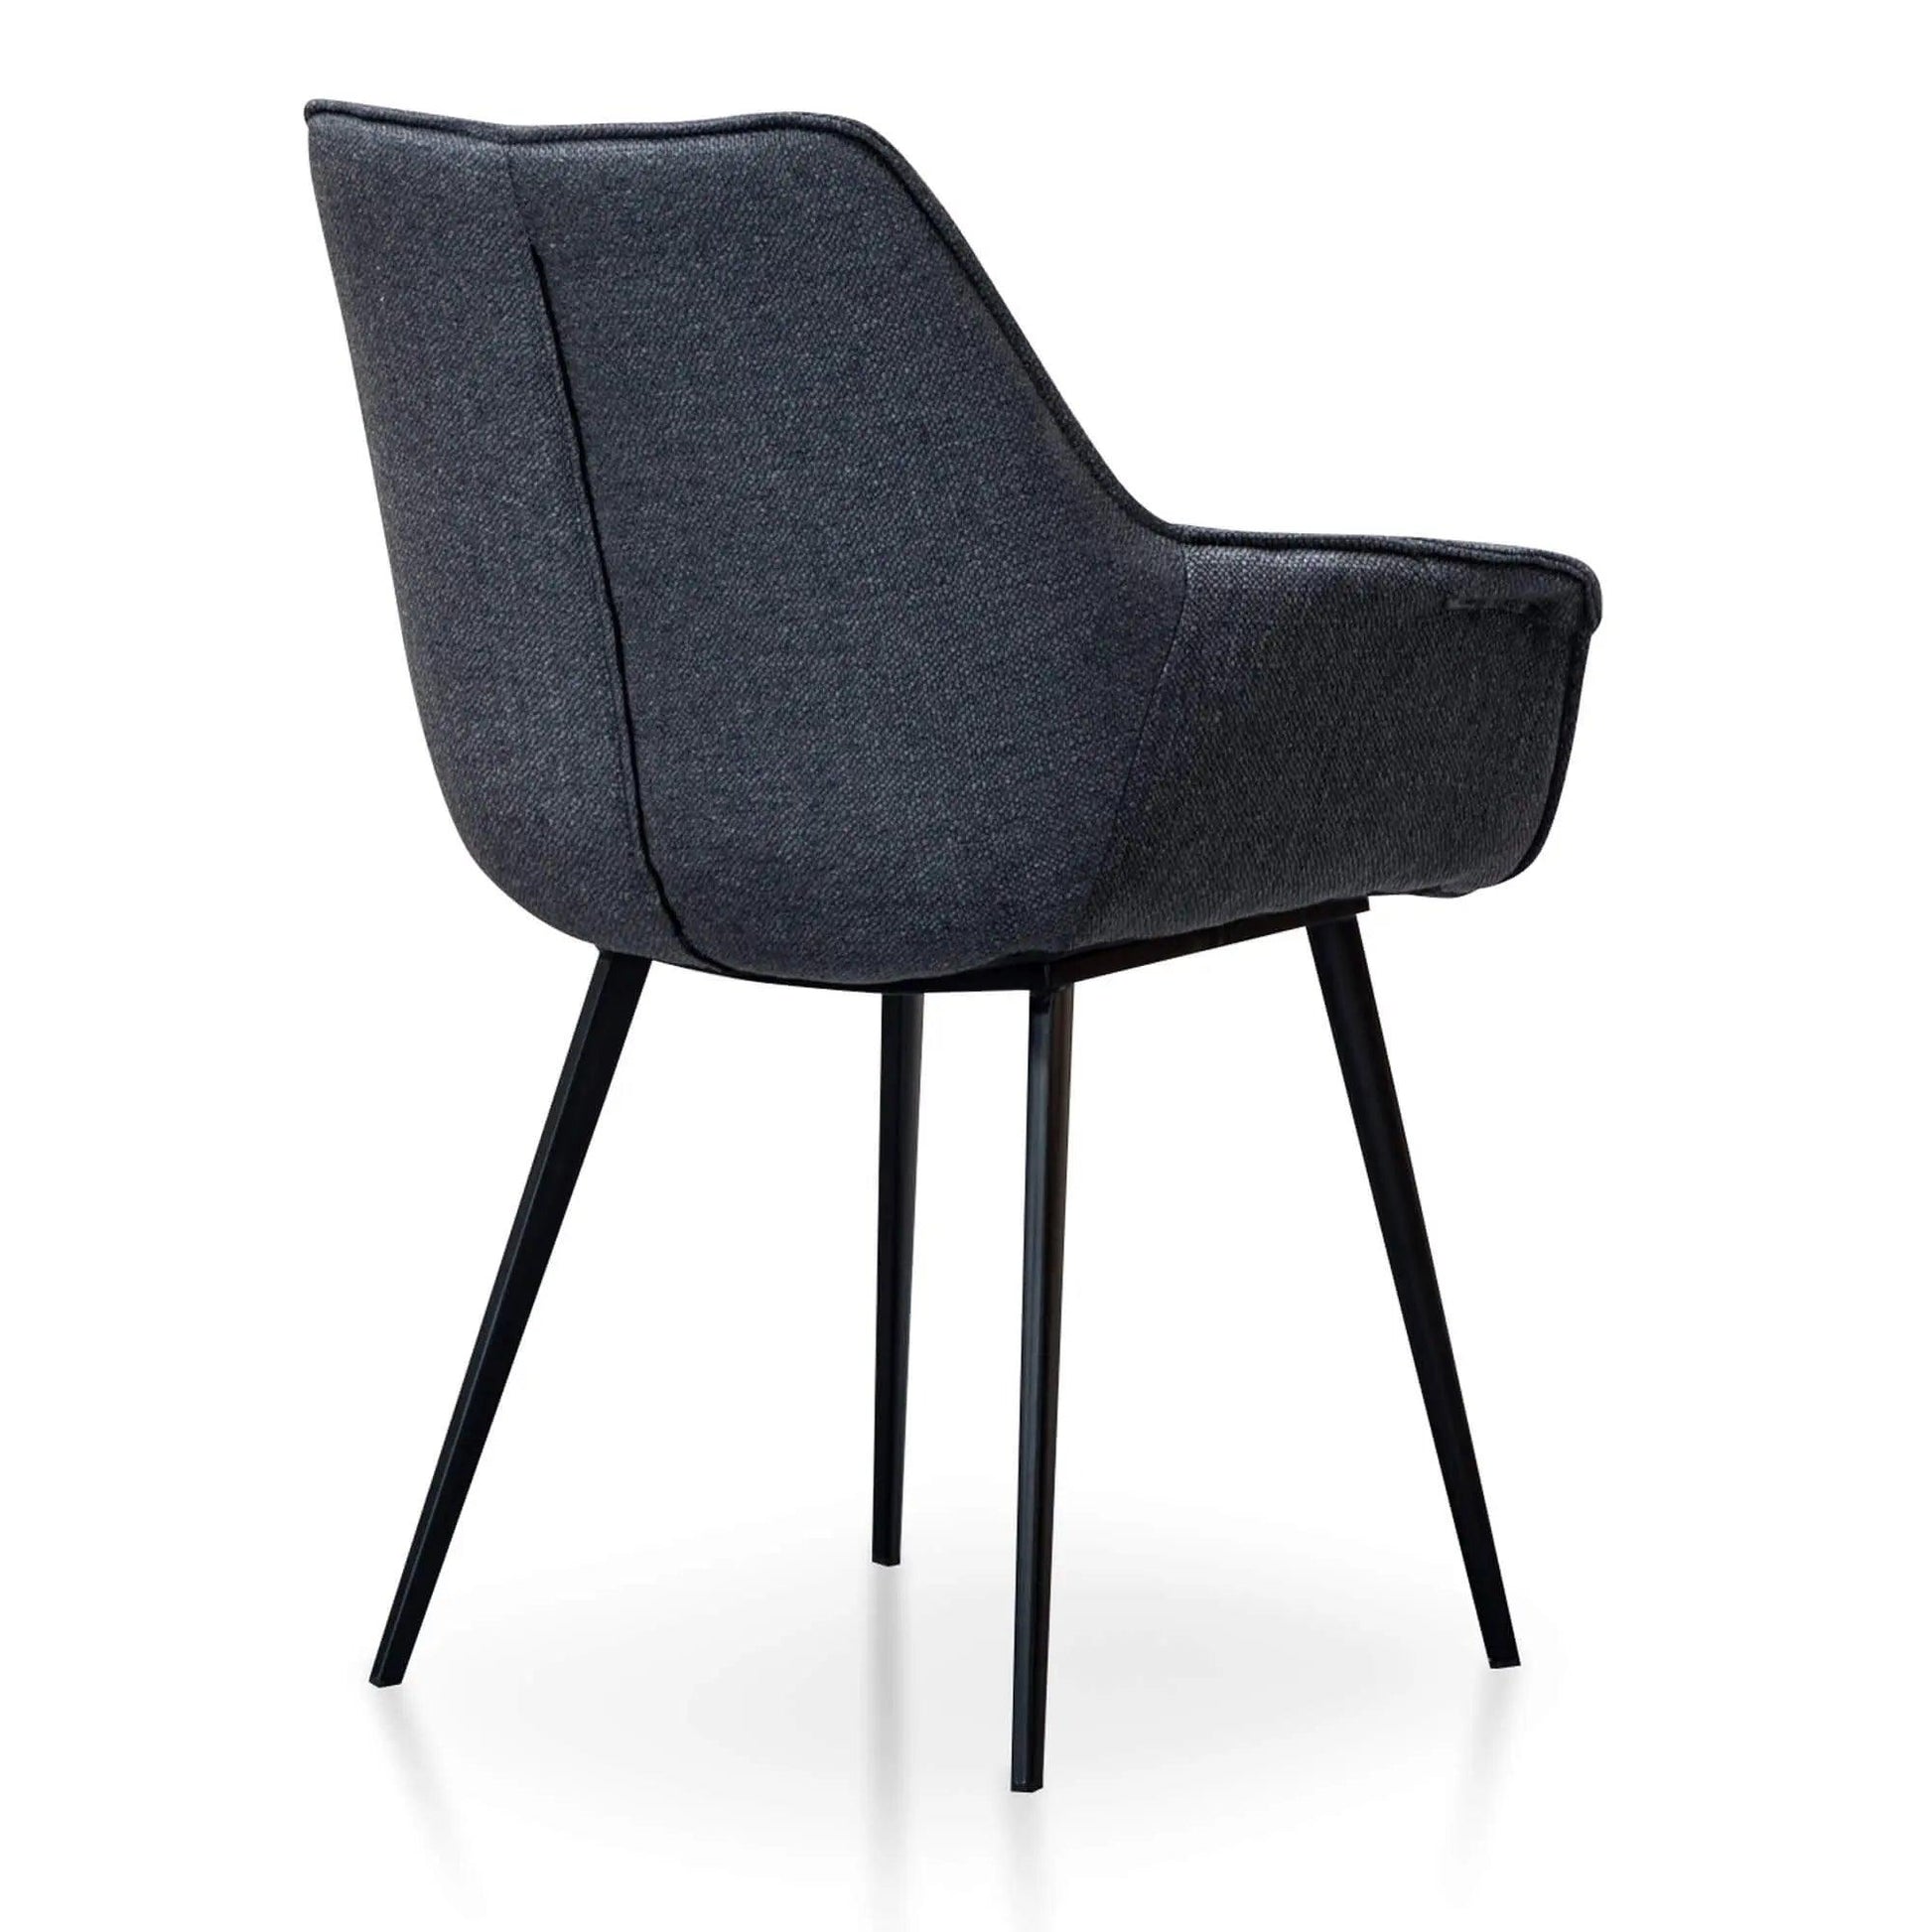 Calibre Dining Chair - Charcoal Grey (Set of 2) DC2633-SEx2 - Dining ChairsDC2633-SEx2 3